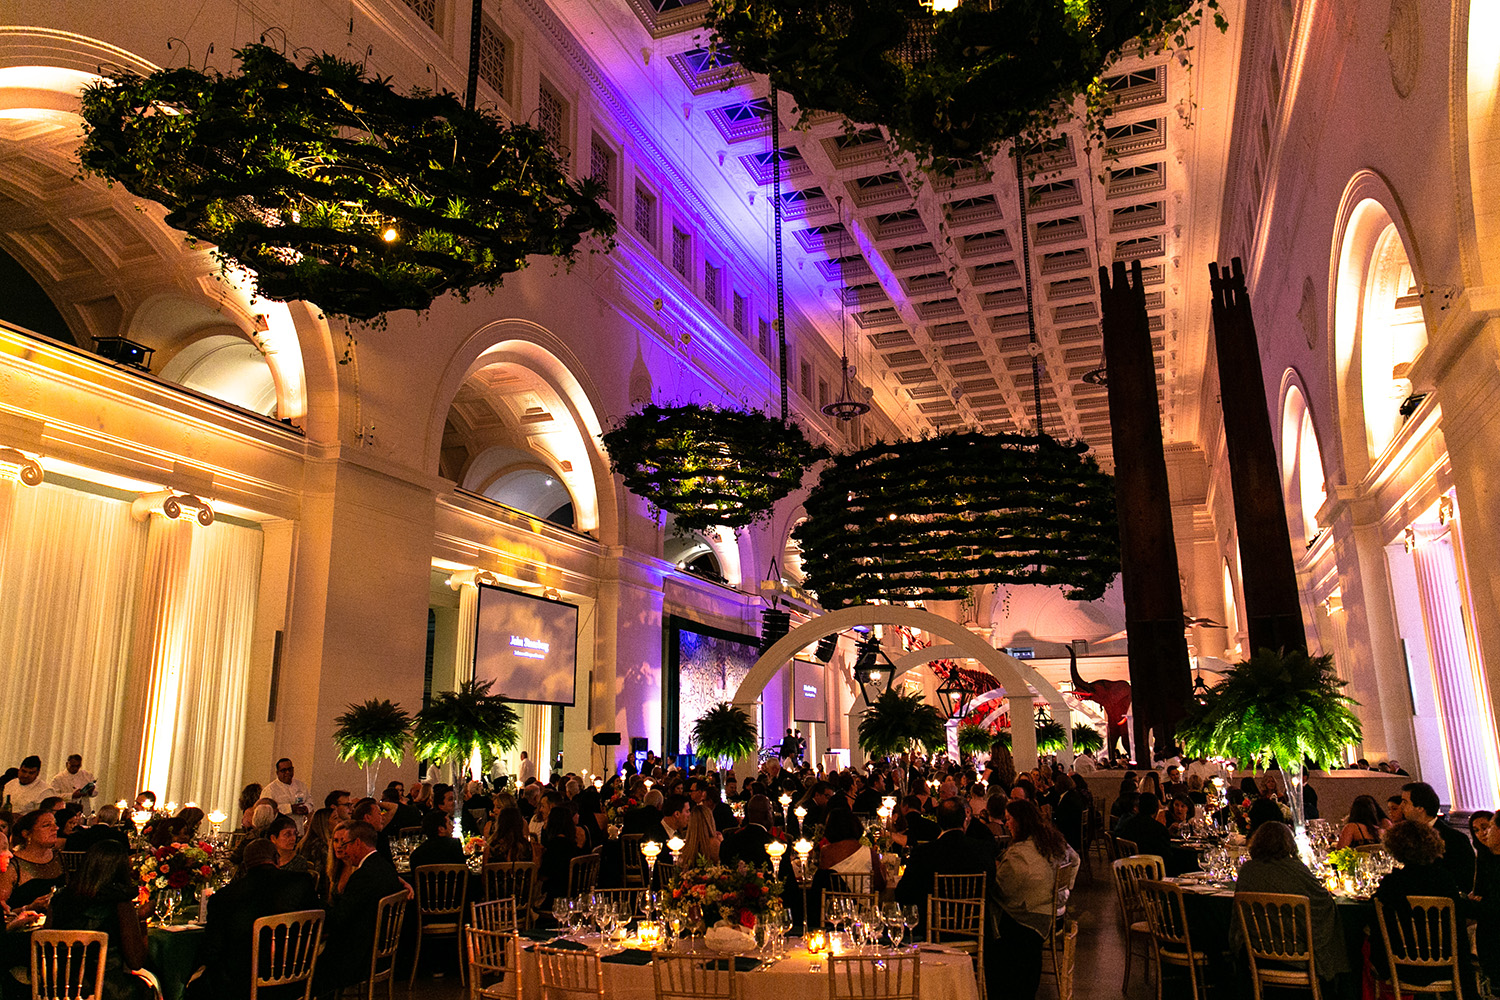 Stanley Field Hall set up for an evening gala event, with attendees seated at circular tables. Dramatic lighting highlights the hanging gardens, and screens displaying a presentation are visible towards the back of the frame.